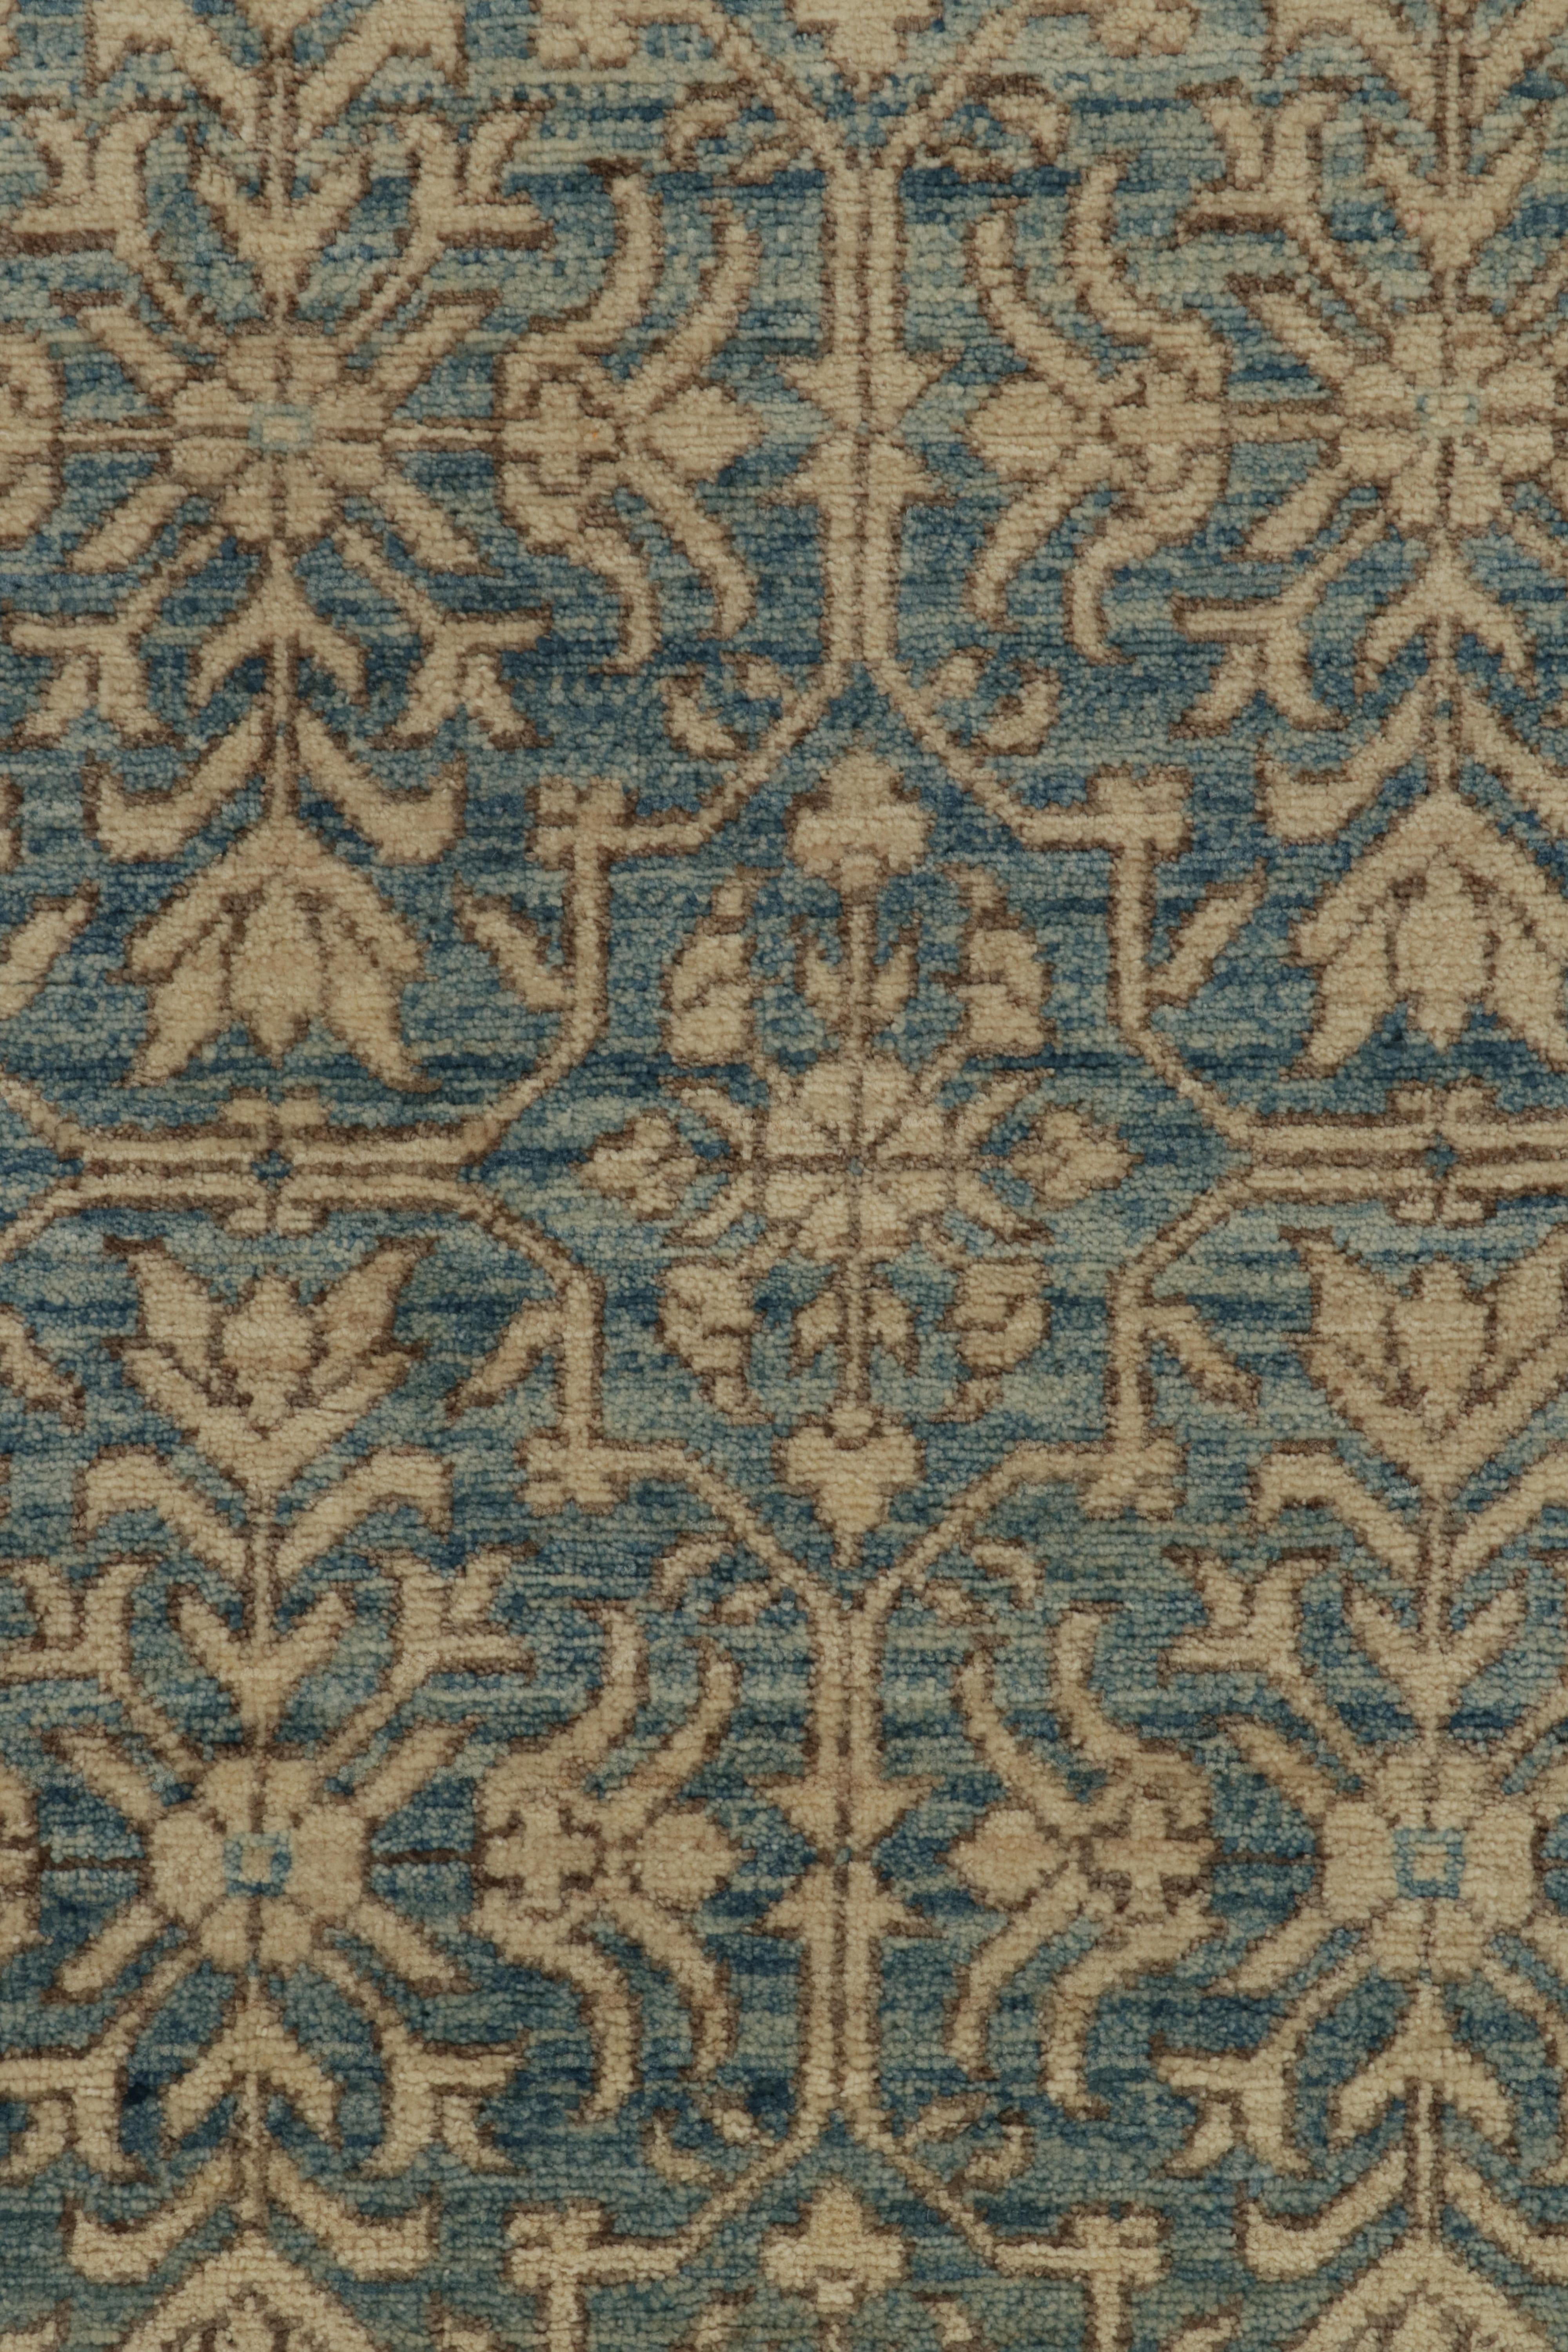 Hand-Knotted Rug & Kilim’s Contemporary Rug in Blue with Beige-Brown Floral Patterns For Sale